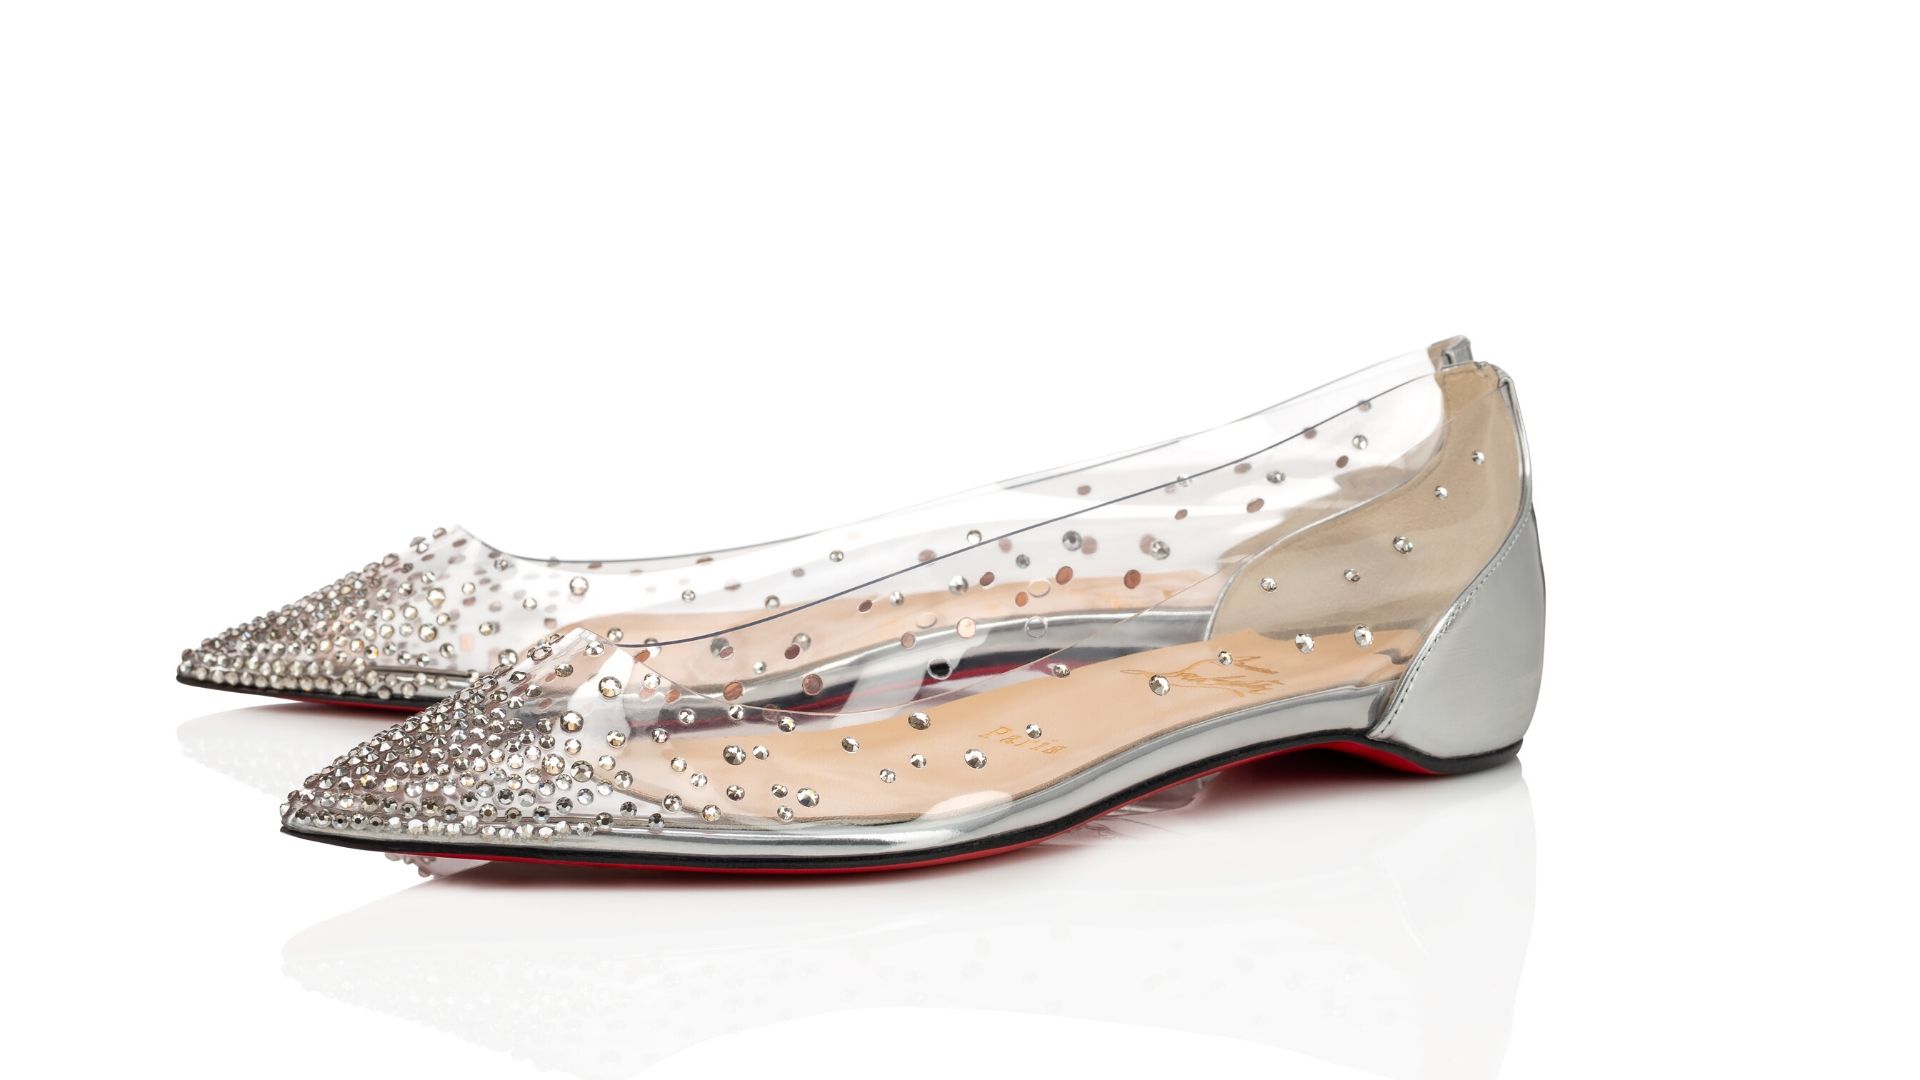 Christian Louboutin's S/S20 Bridal Collection Will Have You